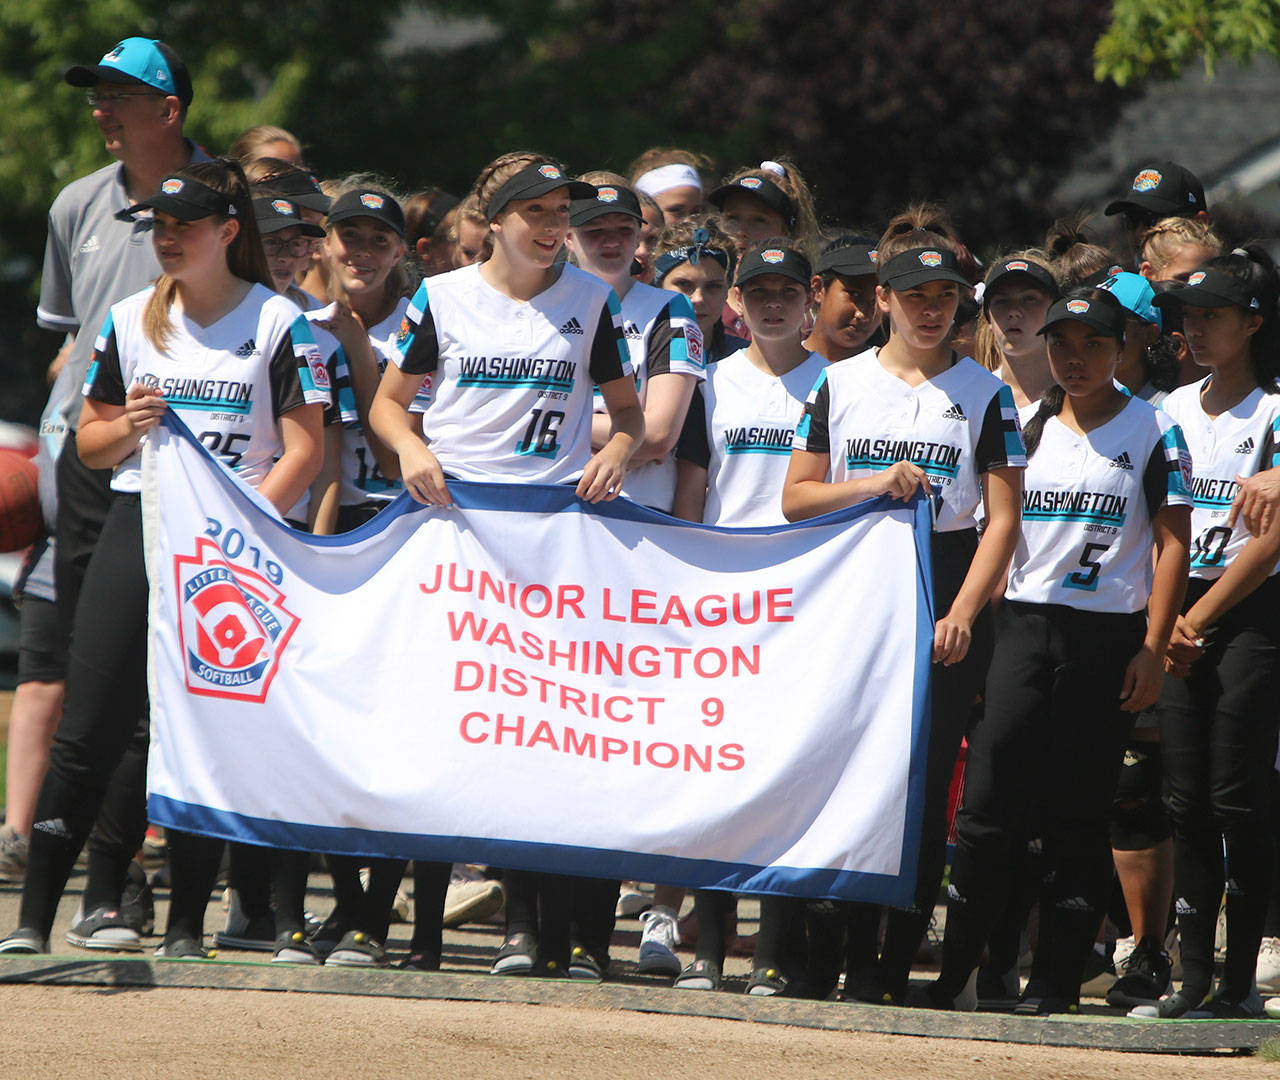 The Eastlake Little League host squad from Sammamish enters the field at the start of the opening ceremony on July 28. Andy Nystrom/ staff photo